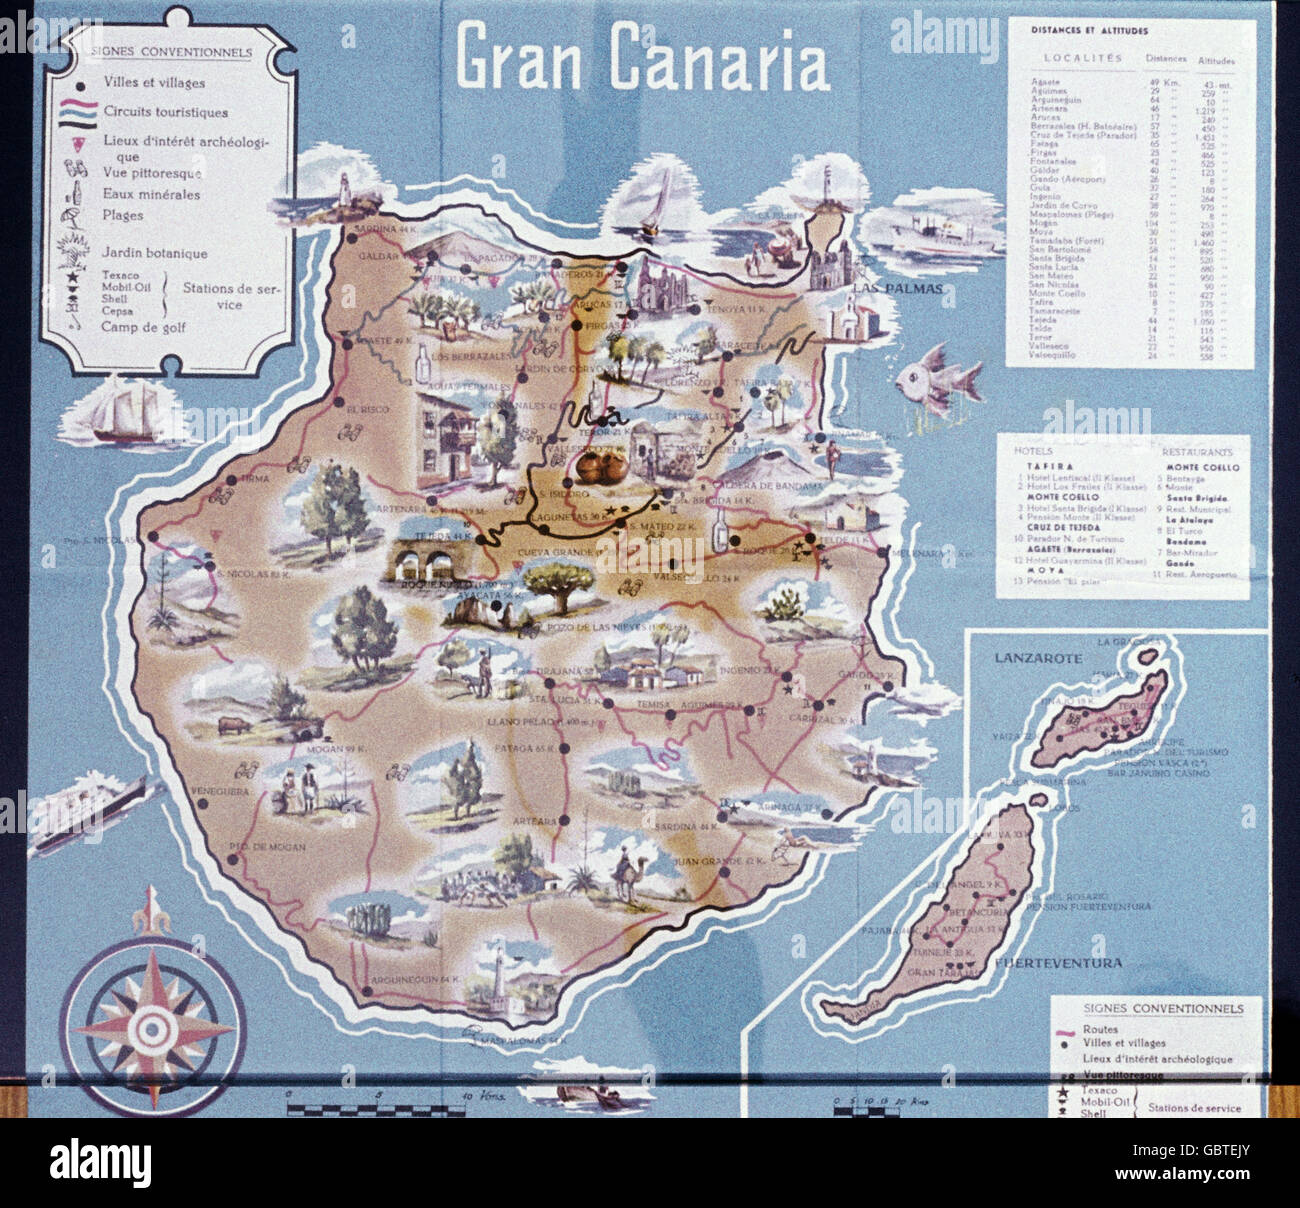 geography / travel, Spain, Canary Islands, Grand Canary, topographic map, 1958, Additional-Rights-Clearences-Not Available Stock Photo